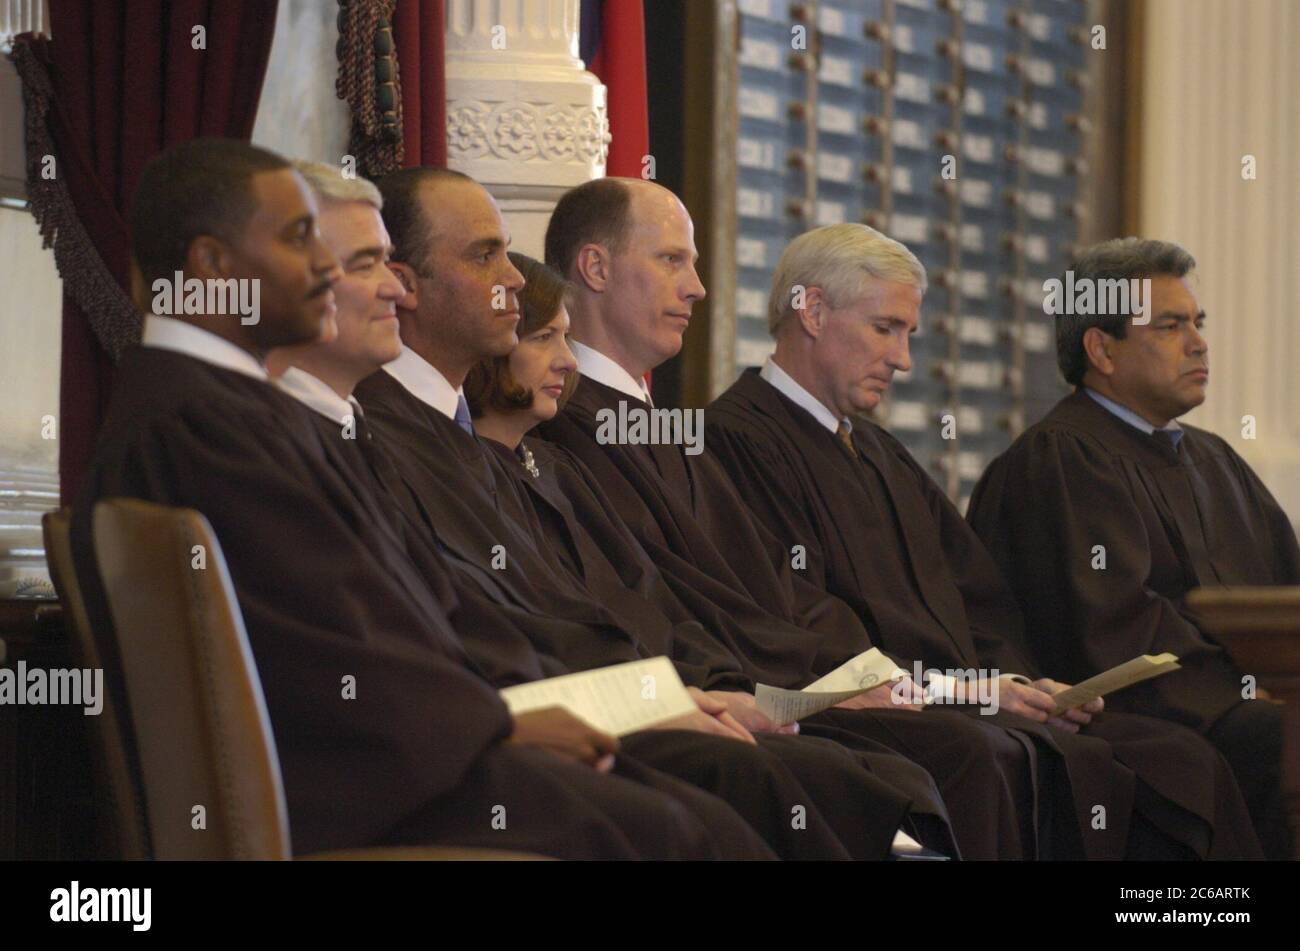 Austin, Texas USA, November 11 2004:  The Texas Supreme Court in session in the House of Representatives Chamber in the Texas Capitol for the investiture ceremony of Justice Wallace Jefferson (third from left).  ©Bob Daemmrich Stock Photo